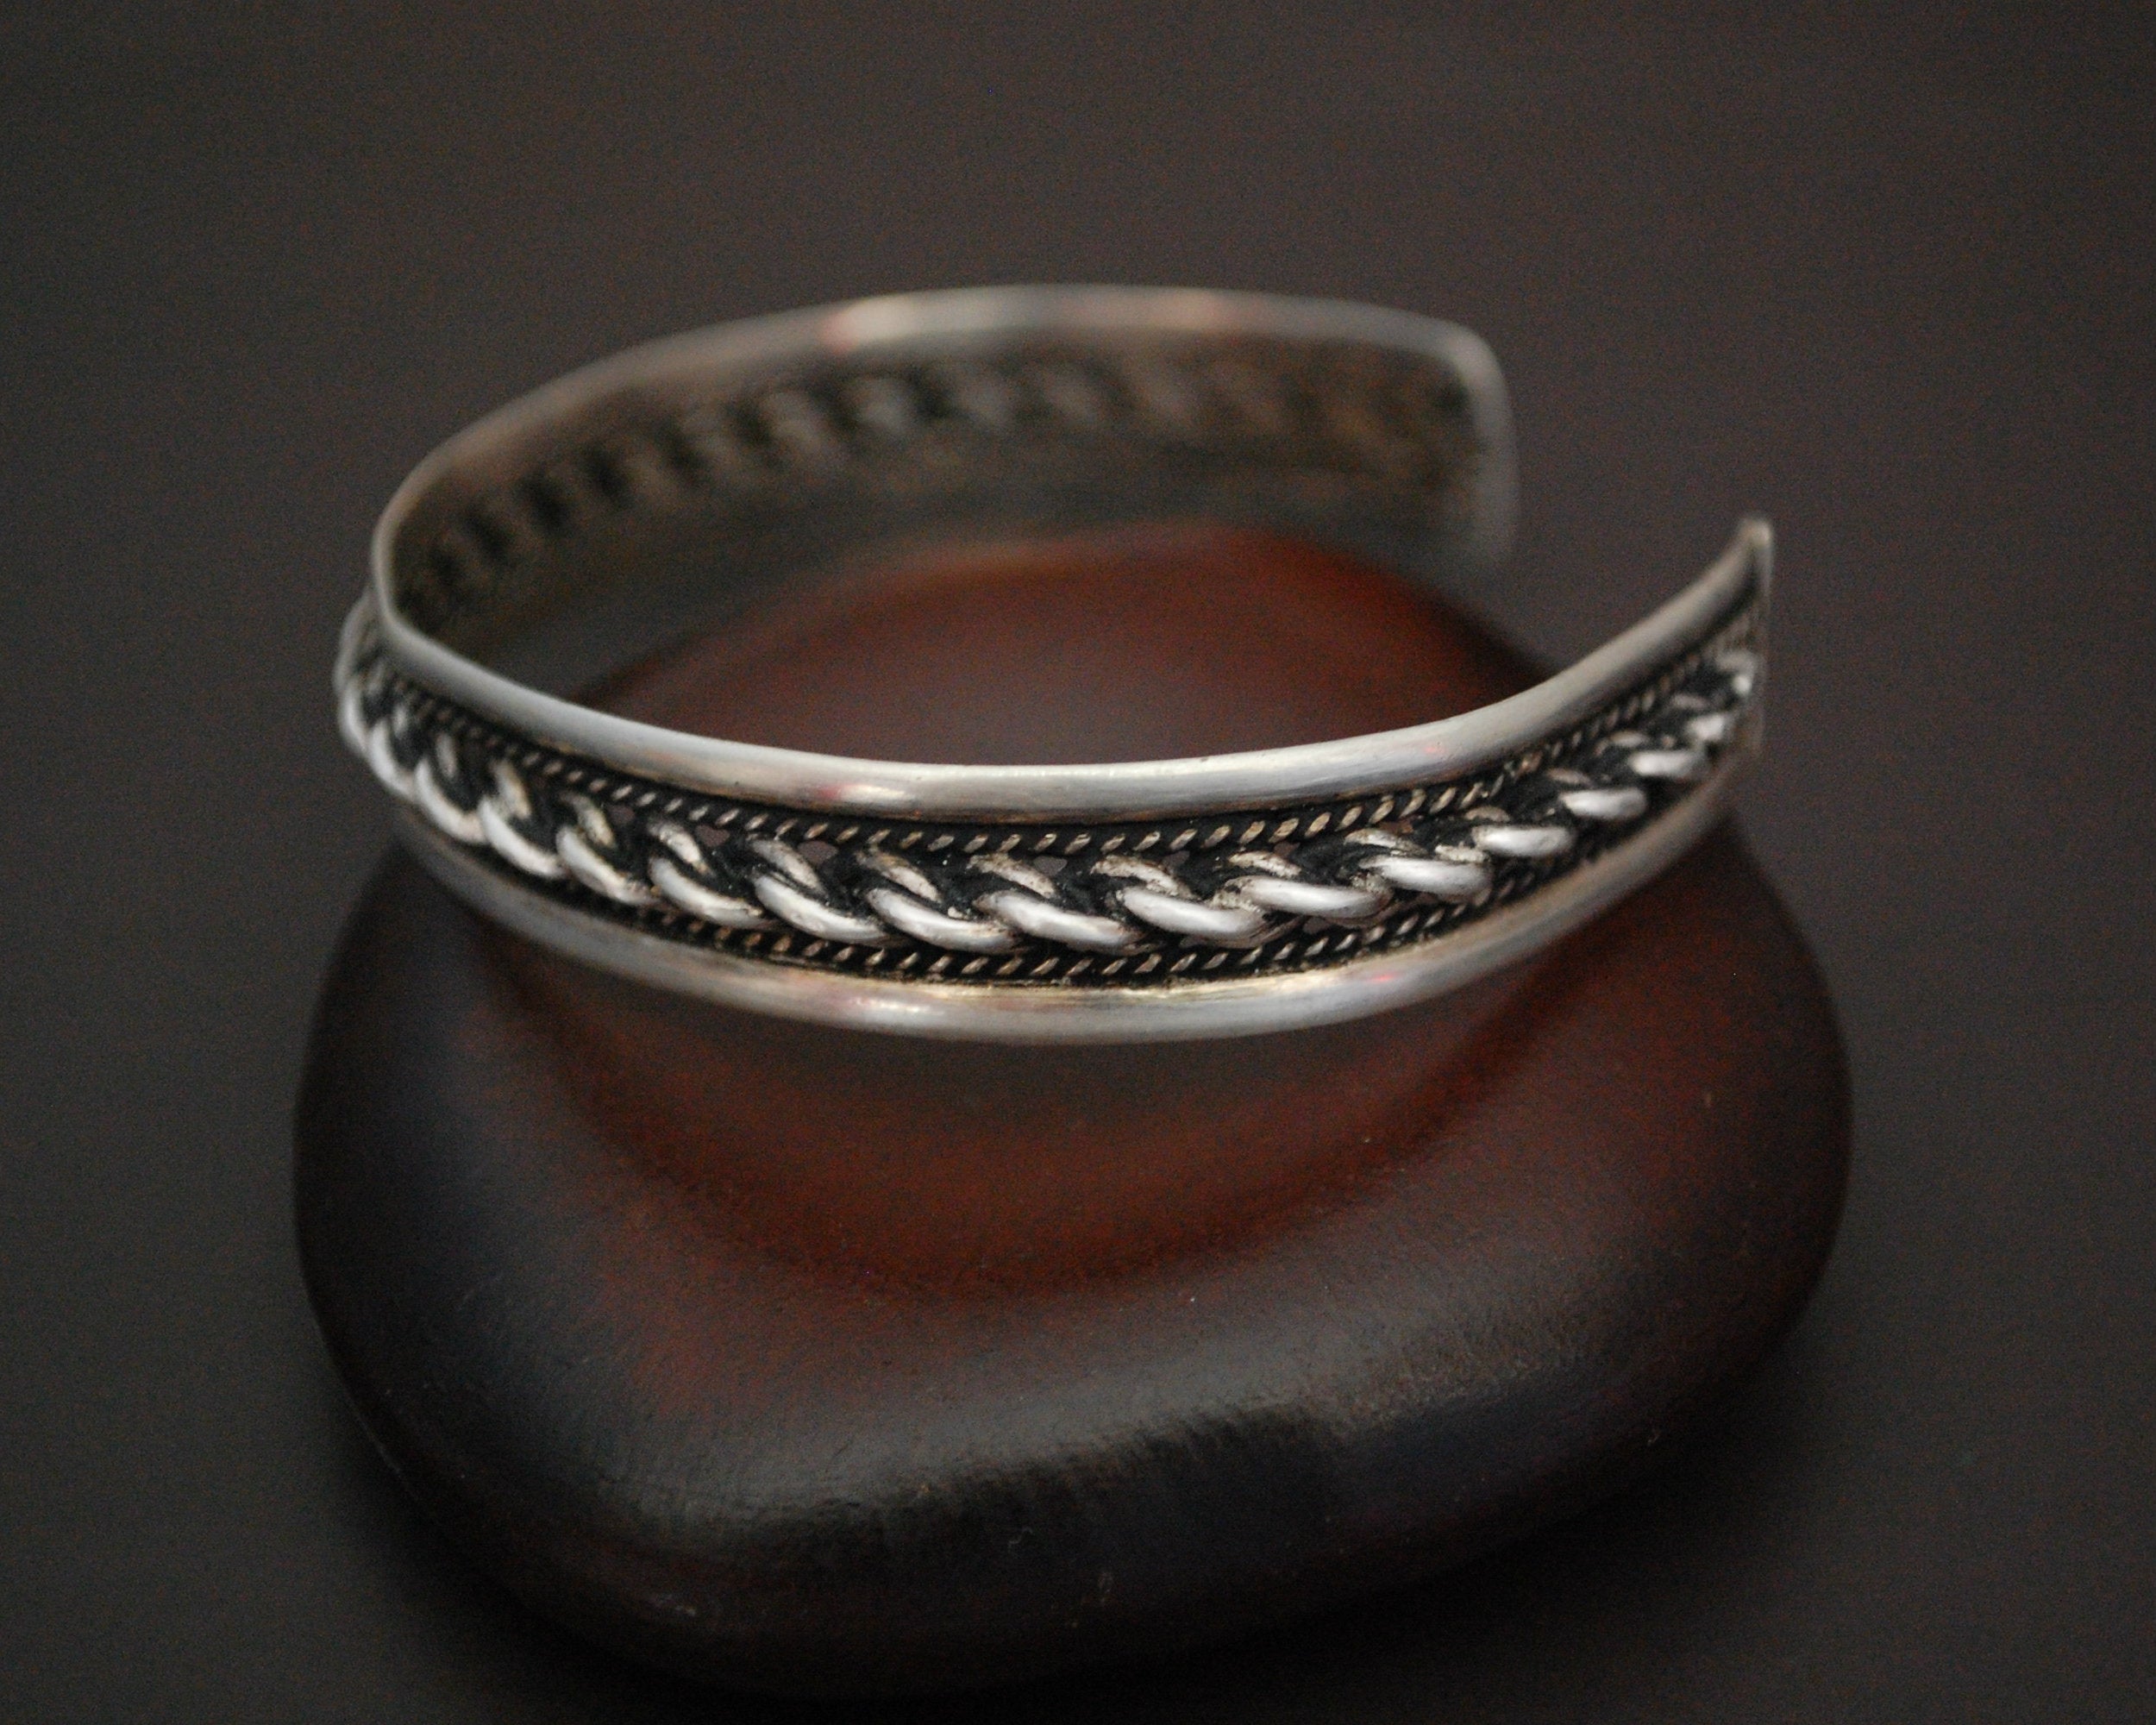 Small Twisted Rope Cuff Bracelet